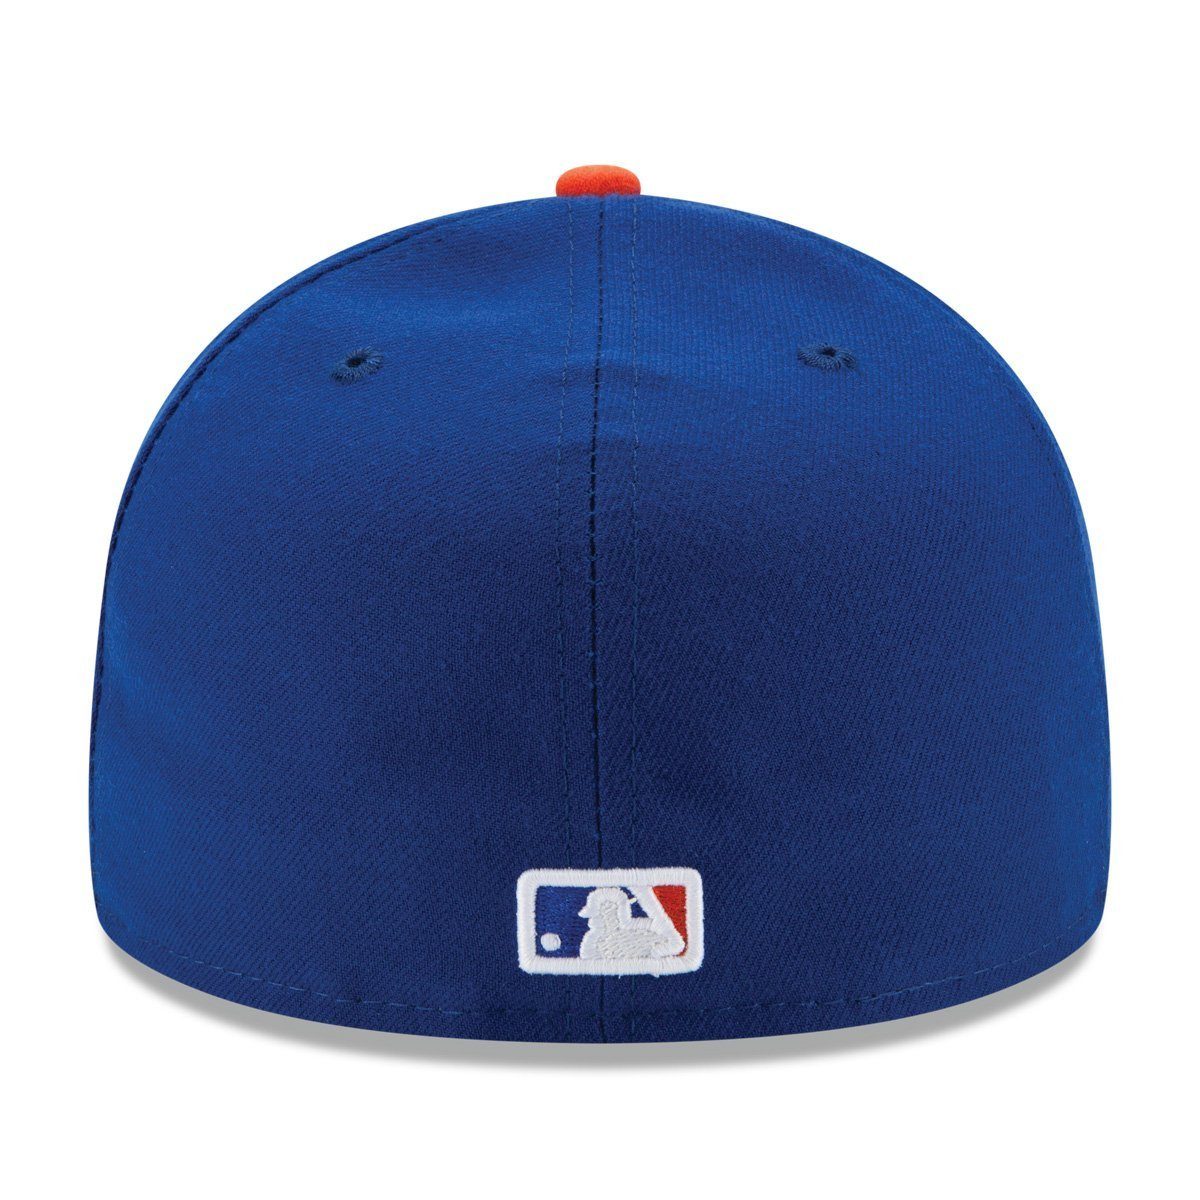 New New Cap Fitted Era ONFIELD York 59Fifty Mets AUTHENTIC